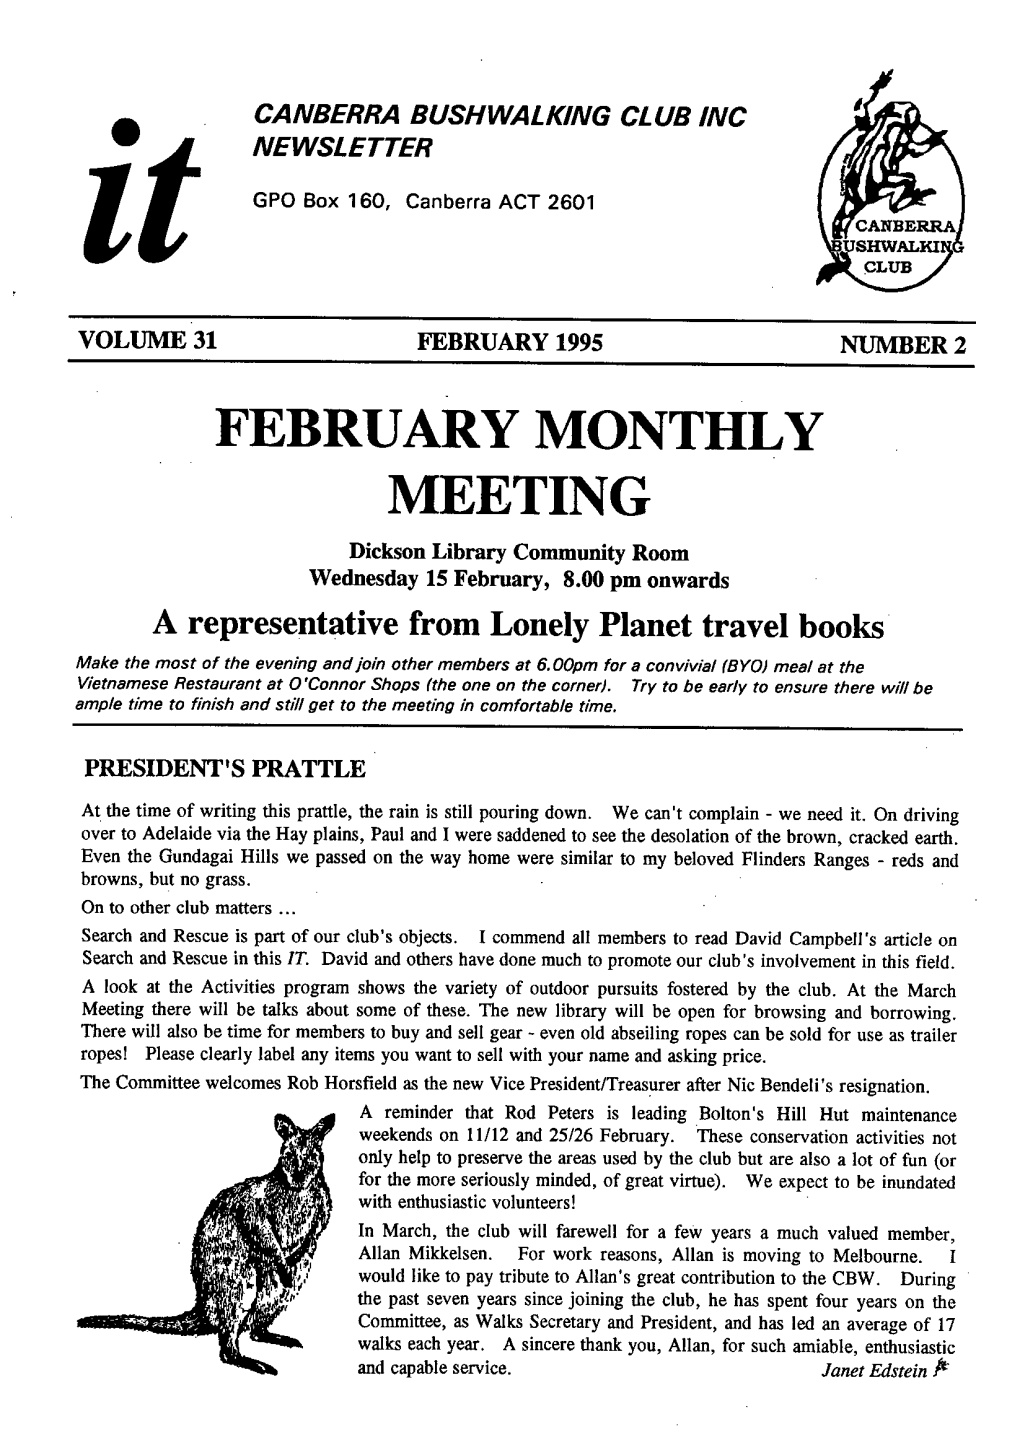 February Monthly Meeting